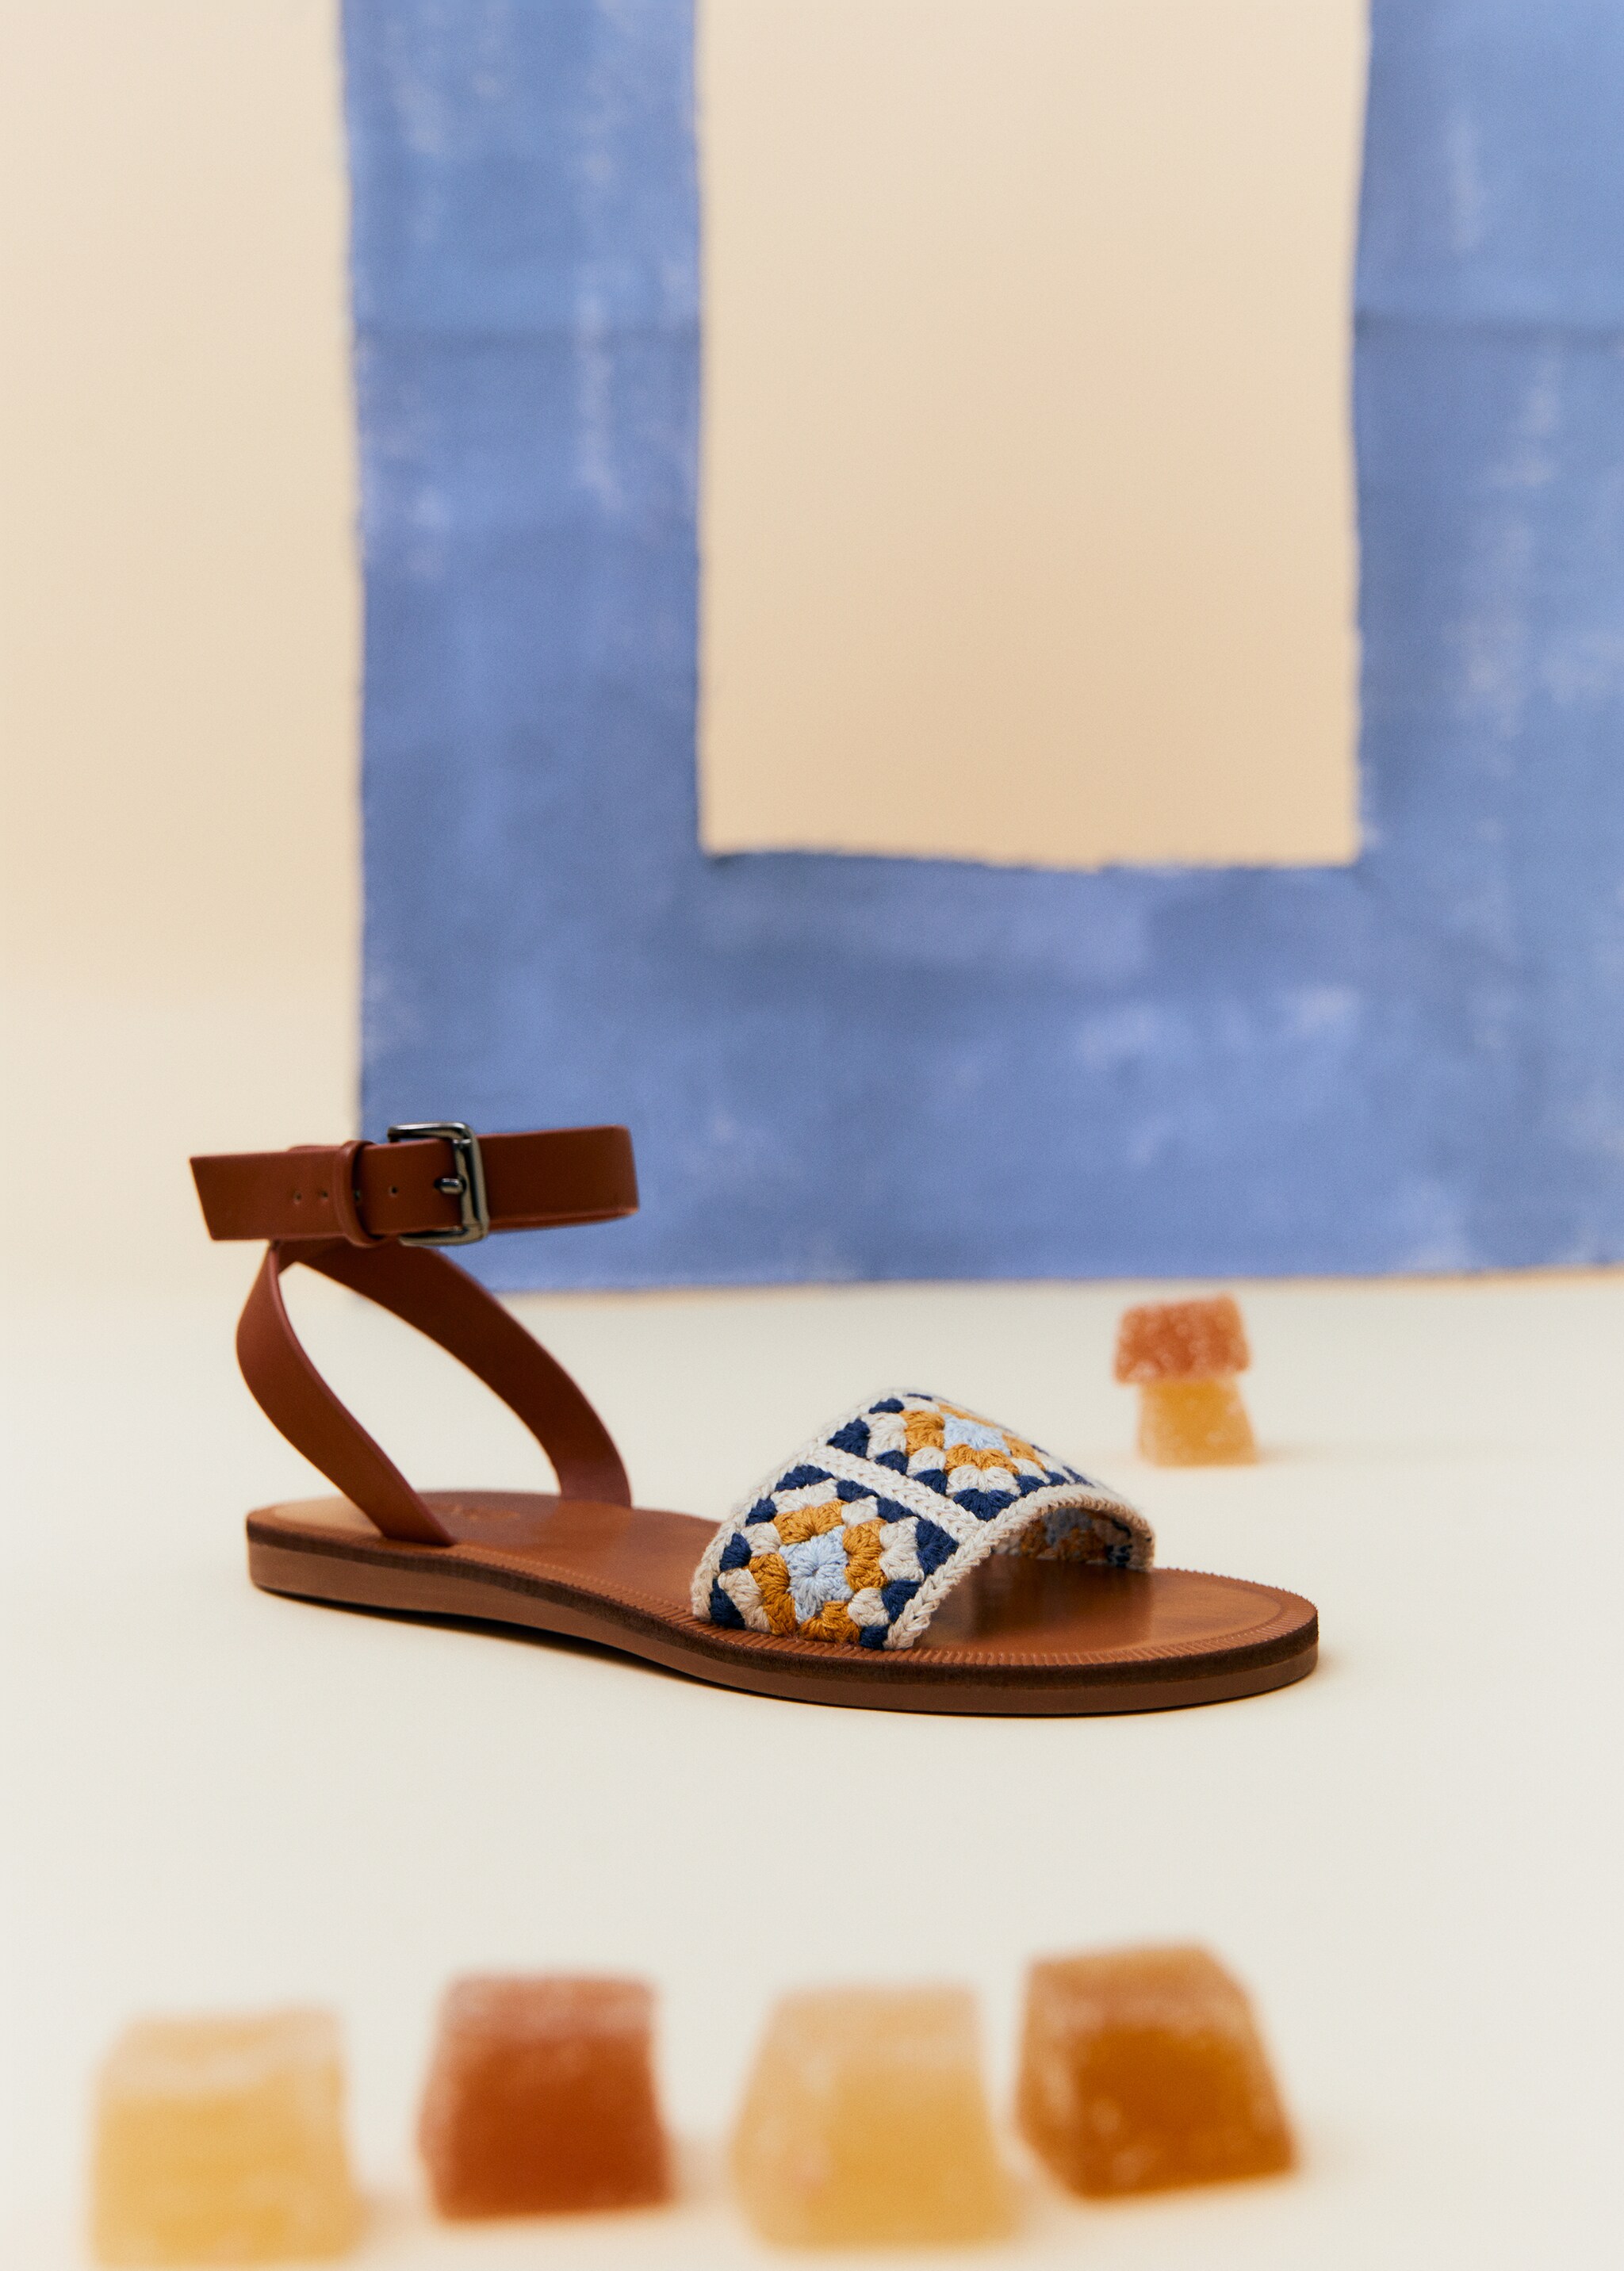 Sandals with embroidered bracelet  - Details of the article 6